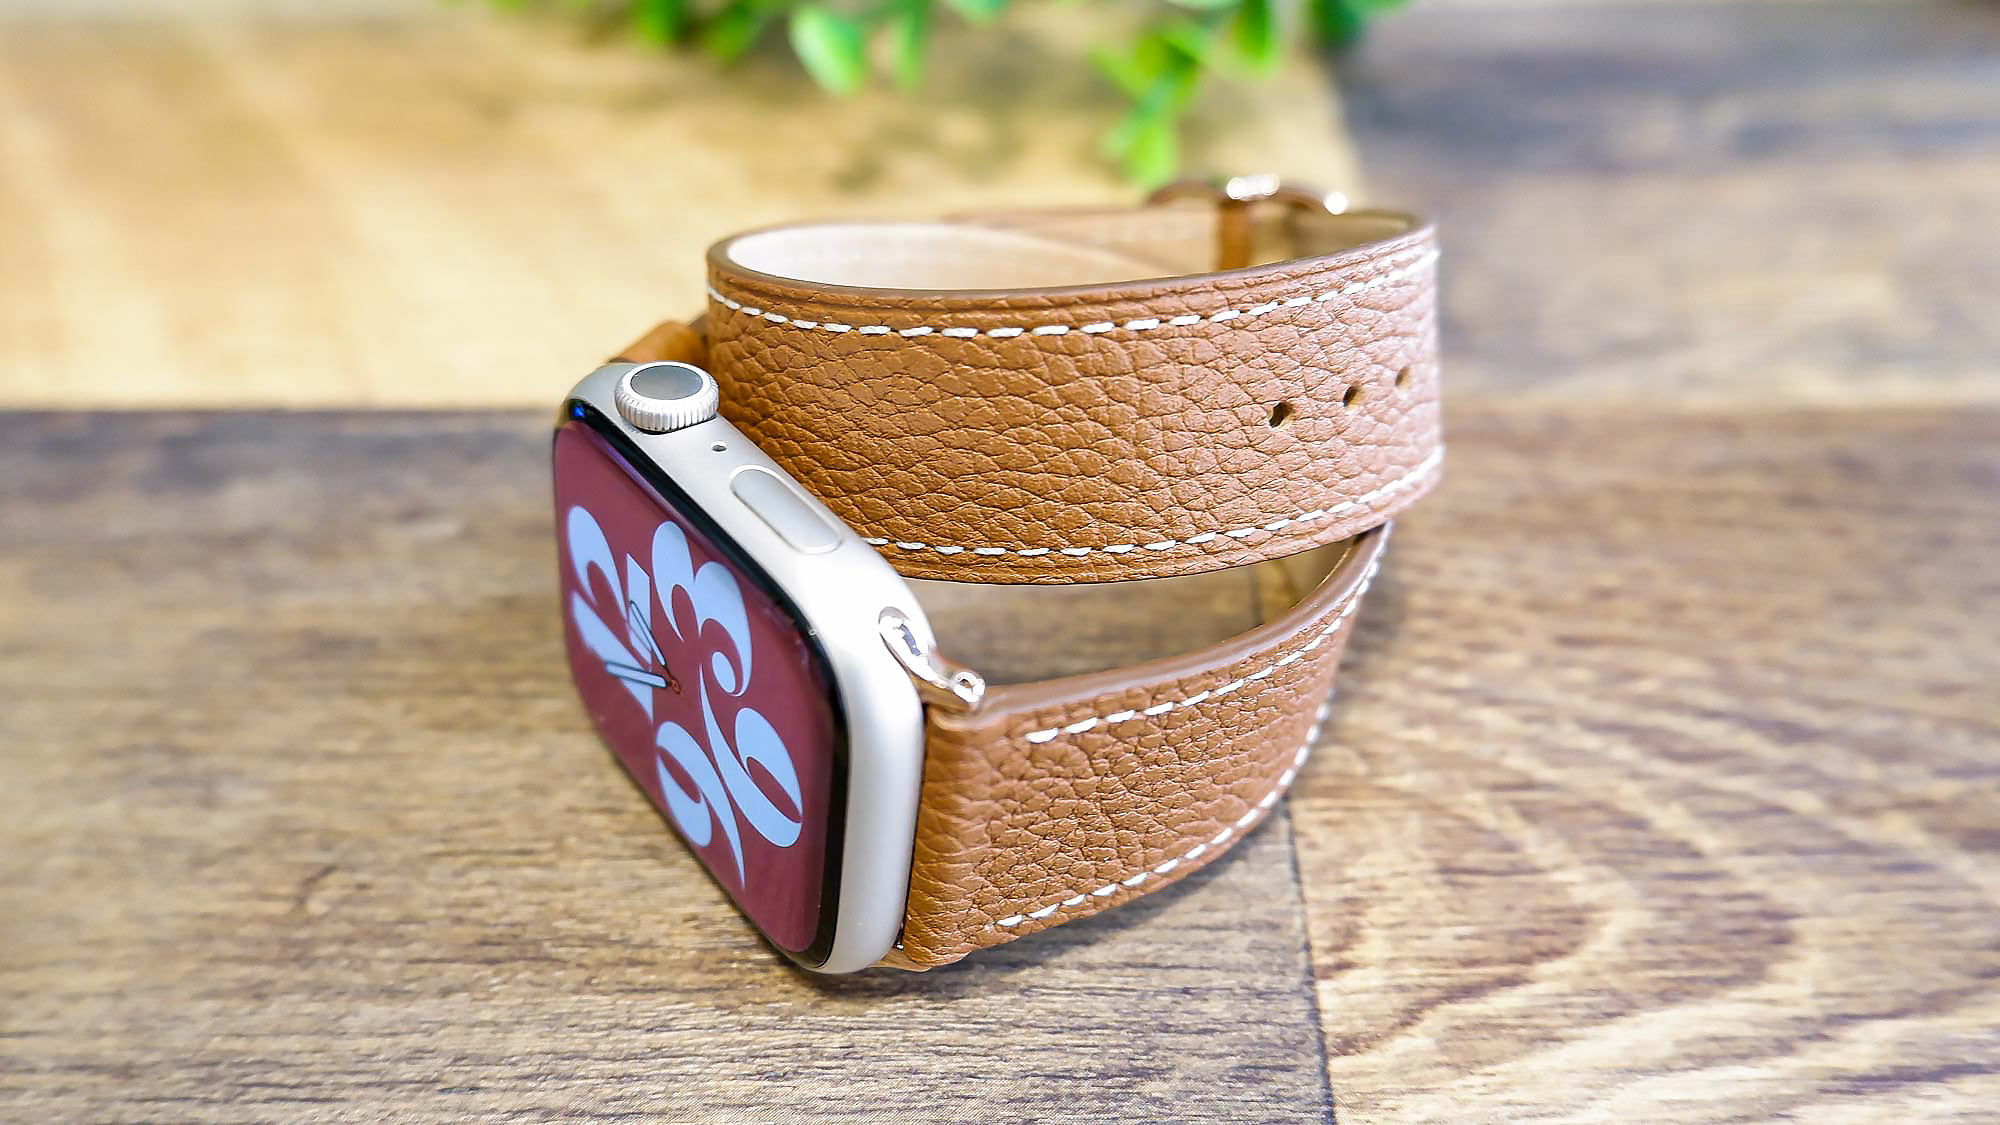 Best Apple Watch bands: Casetify 2-in-1 Italian Leather Watch Band